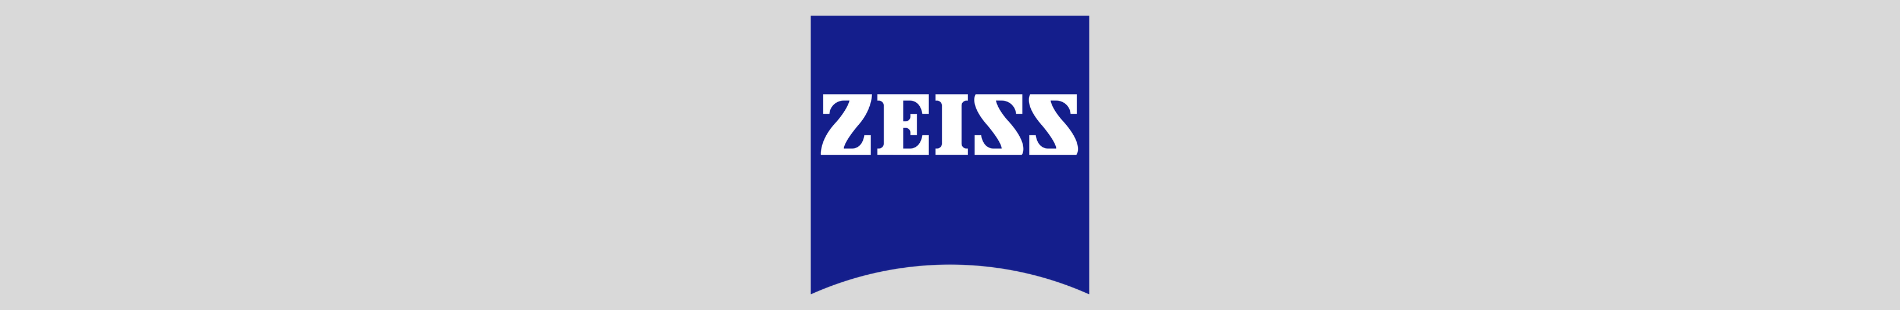 Ocuco Rolls out Zeiss Electronic Ordering Link